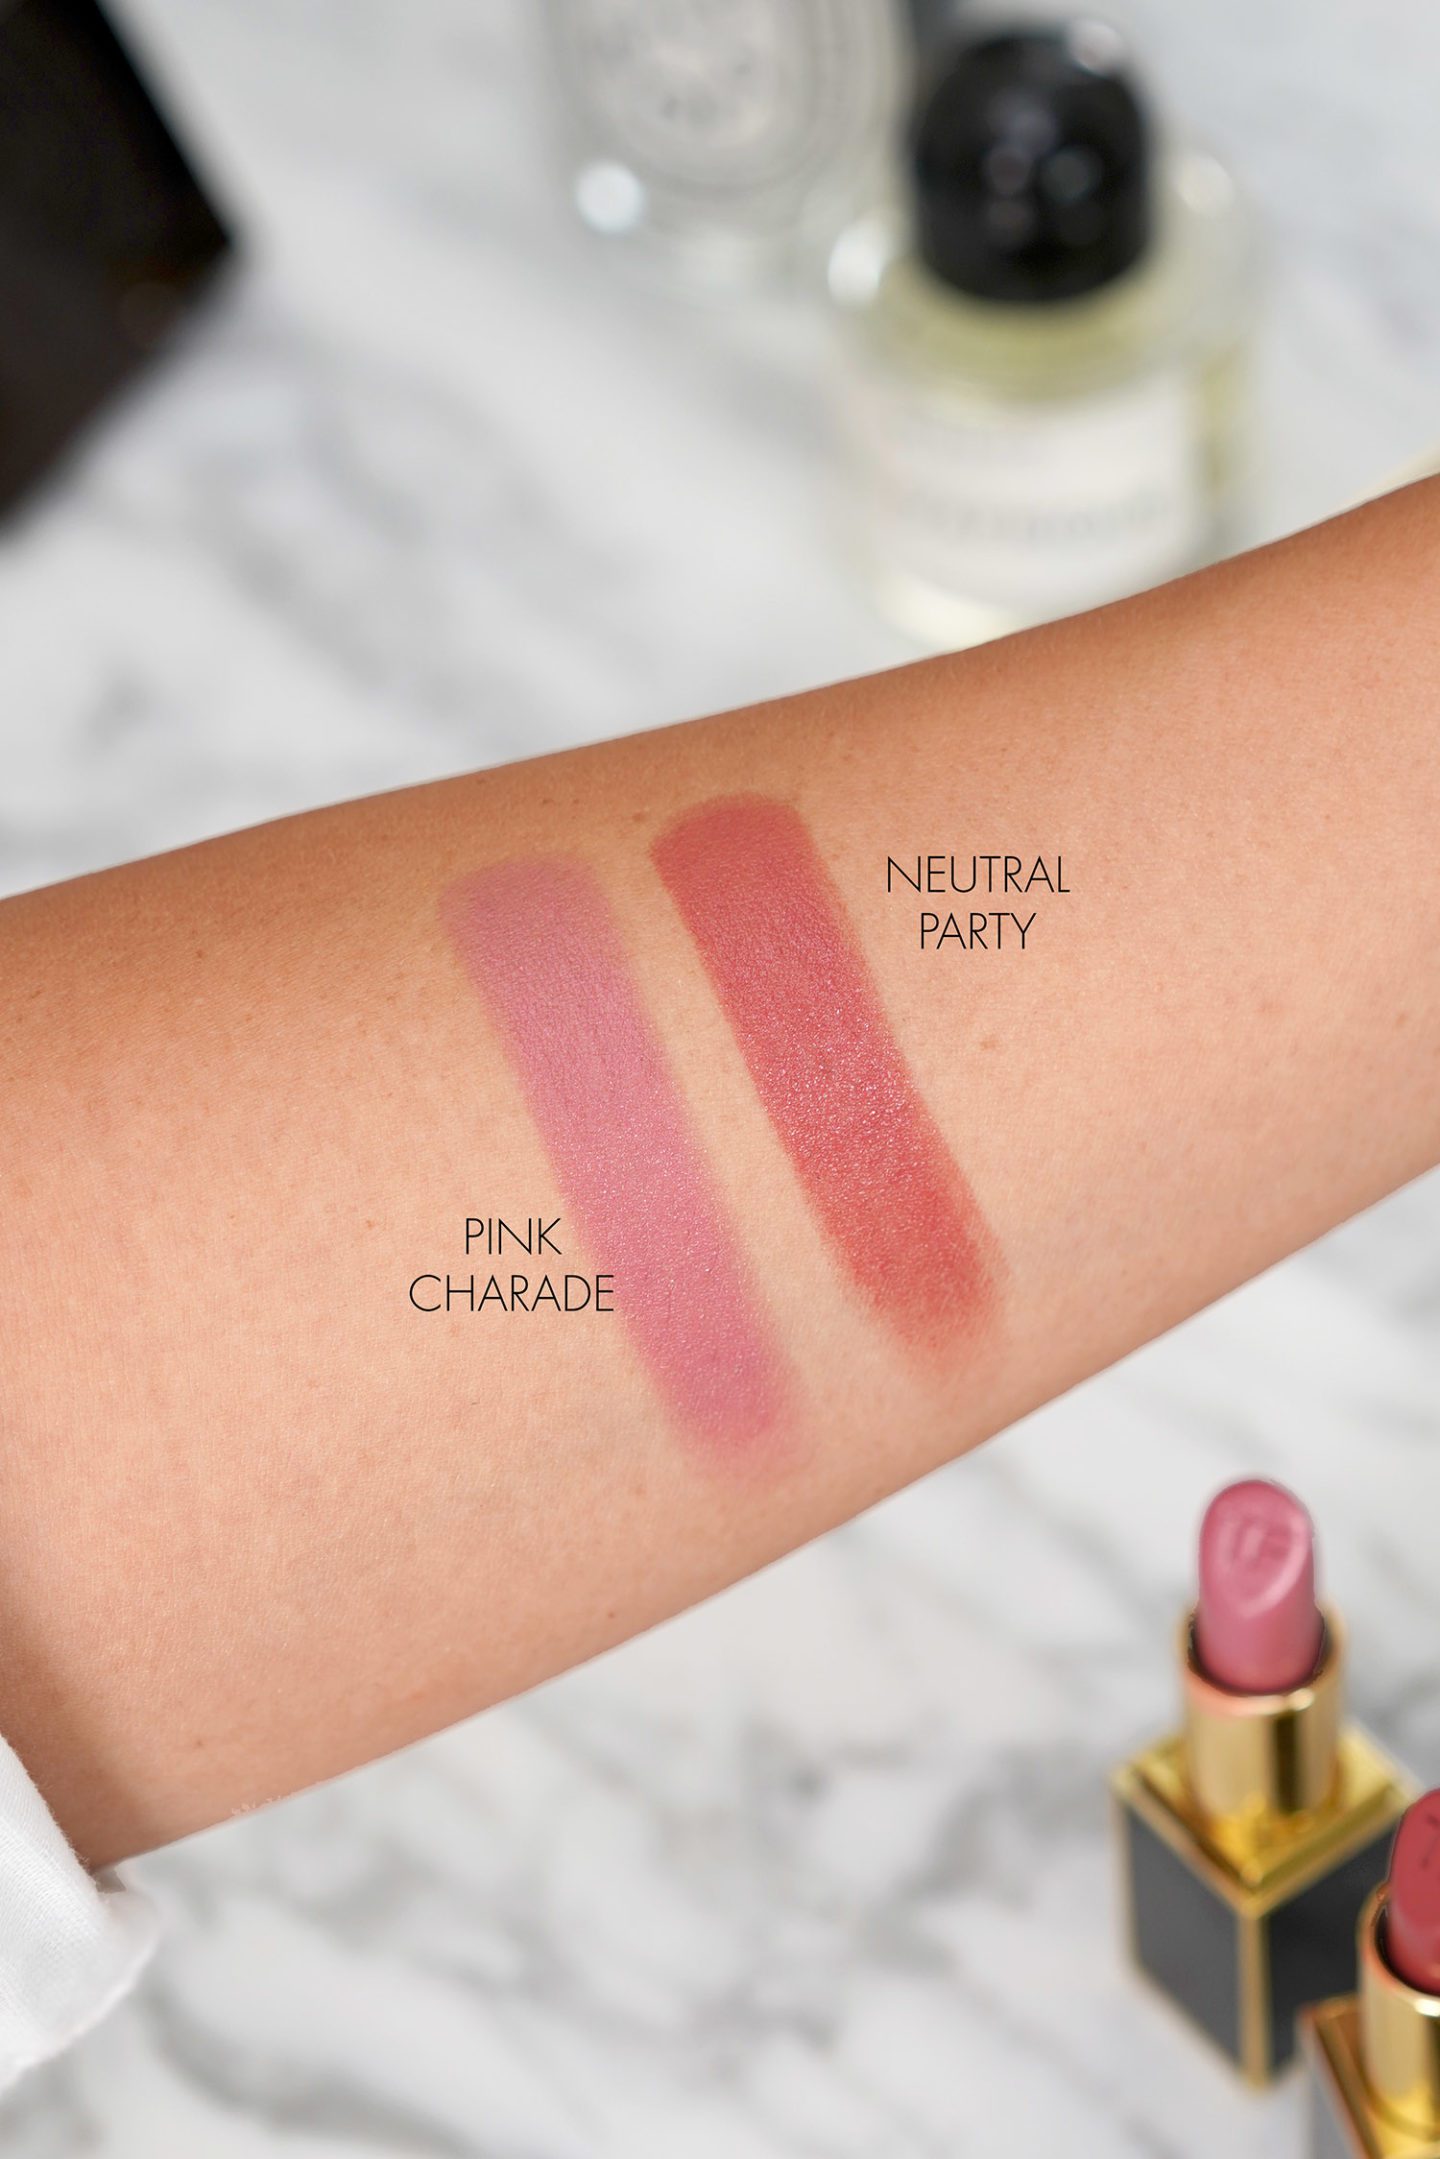 Tom Ford Lip Color Pink Charade and Neutral Party swatches